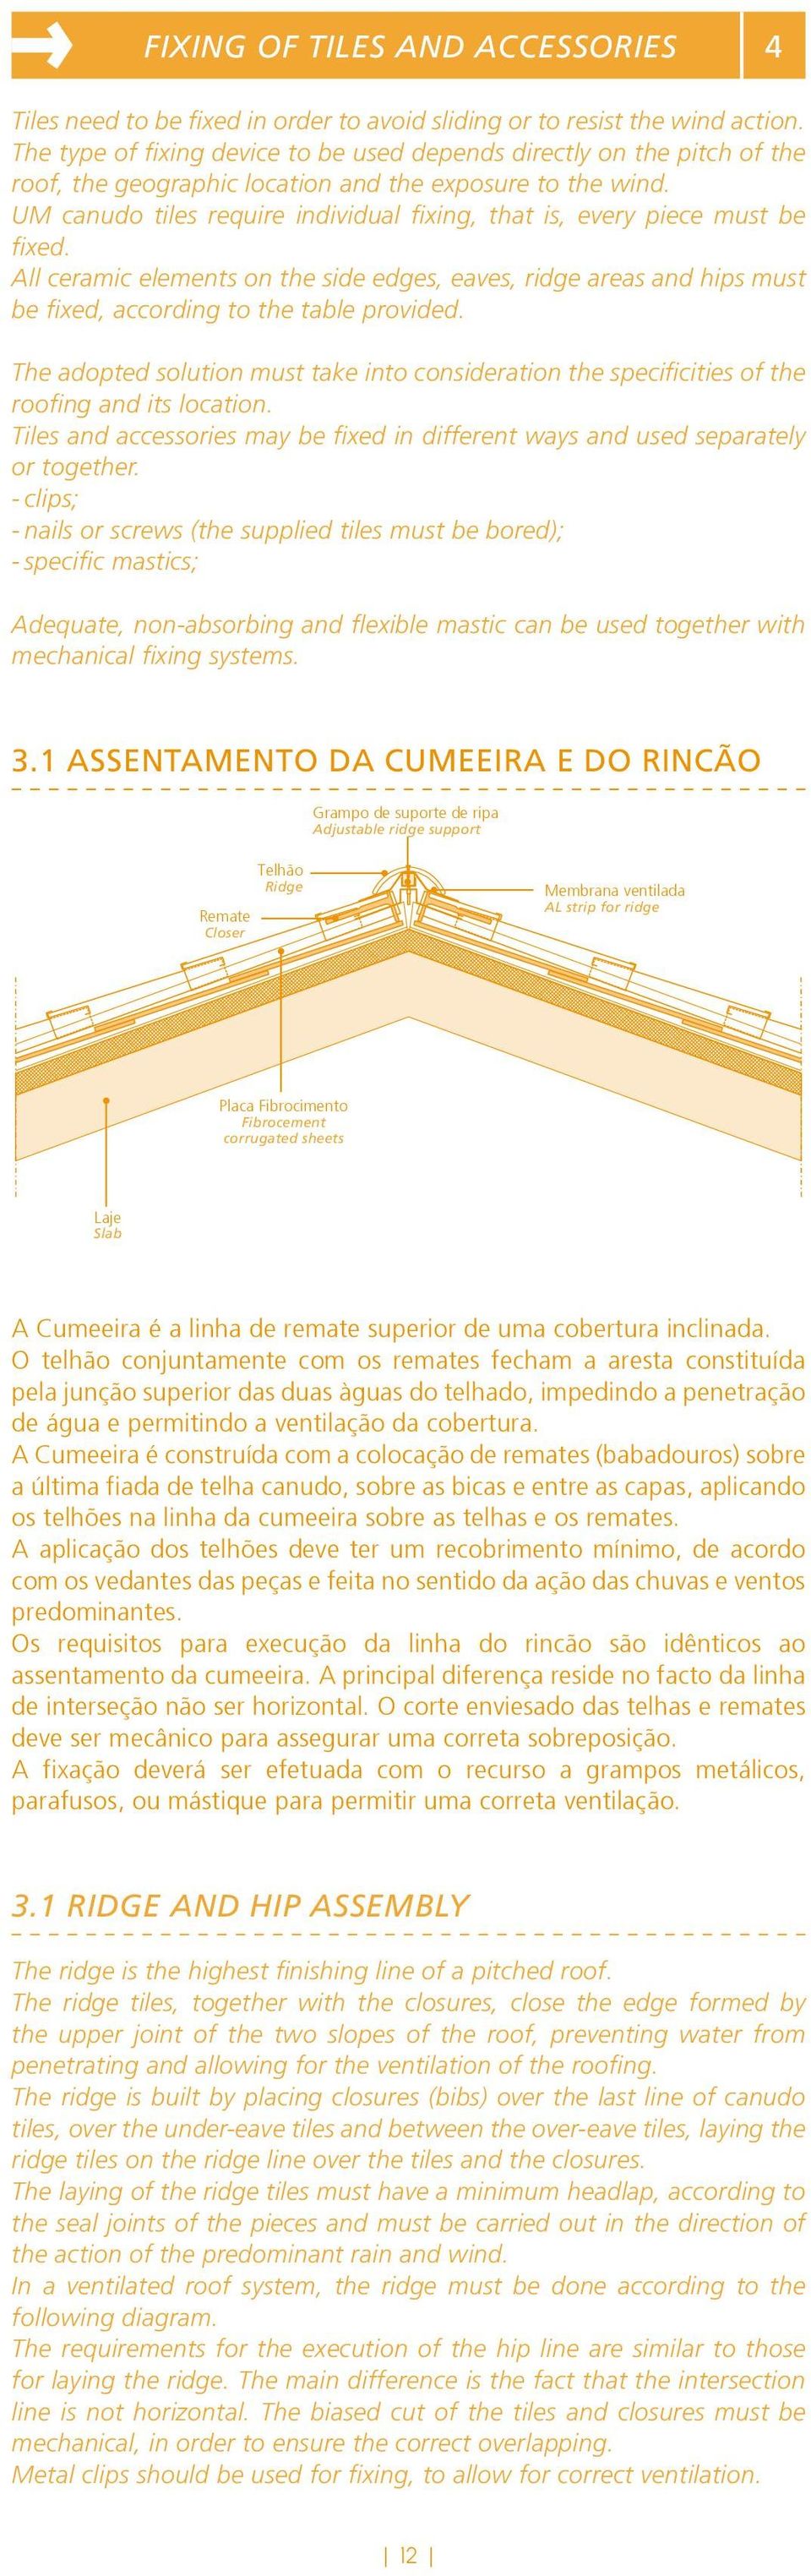 UM canudo tiles require individual fixing, that is, every piece must be fixed. All ceramic elements on the side edges, eaves, ridge areas and hips must be fixed, according to the table provided.